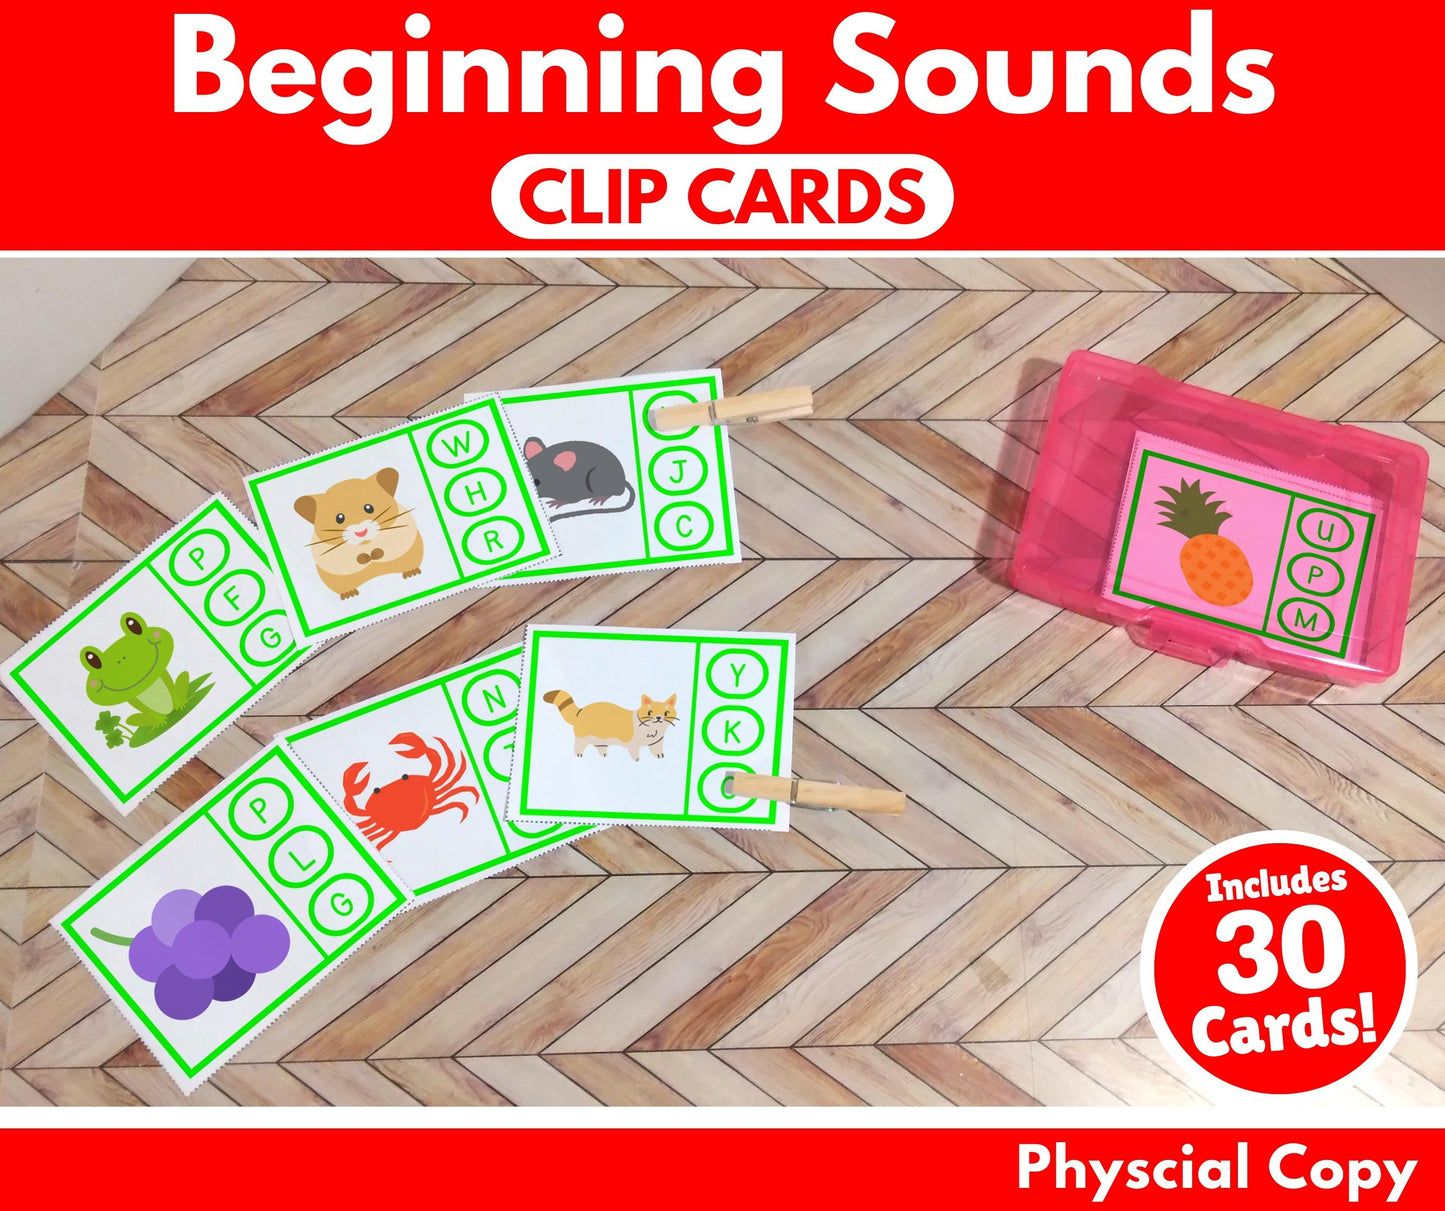 Beginning Sounds Clip Cards - Physical Copy